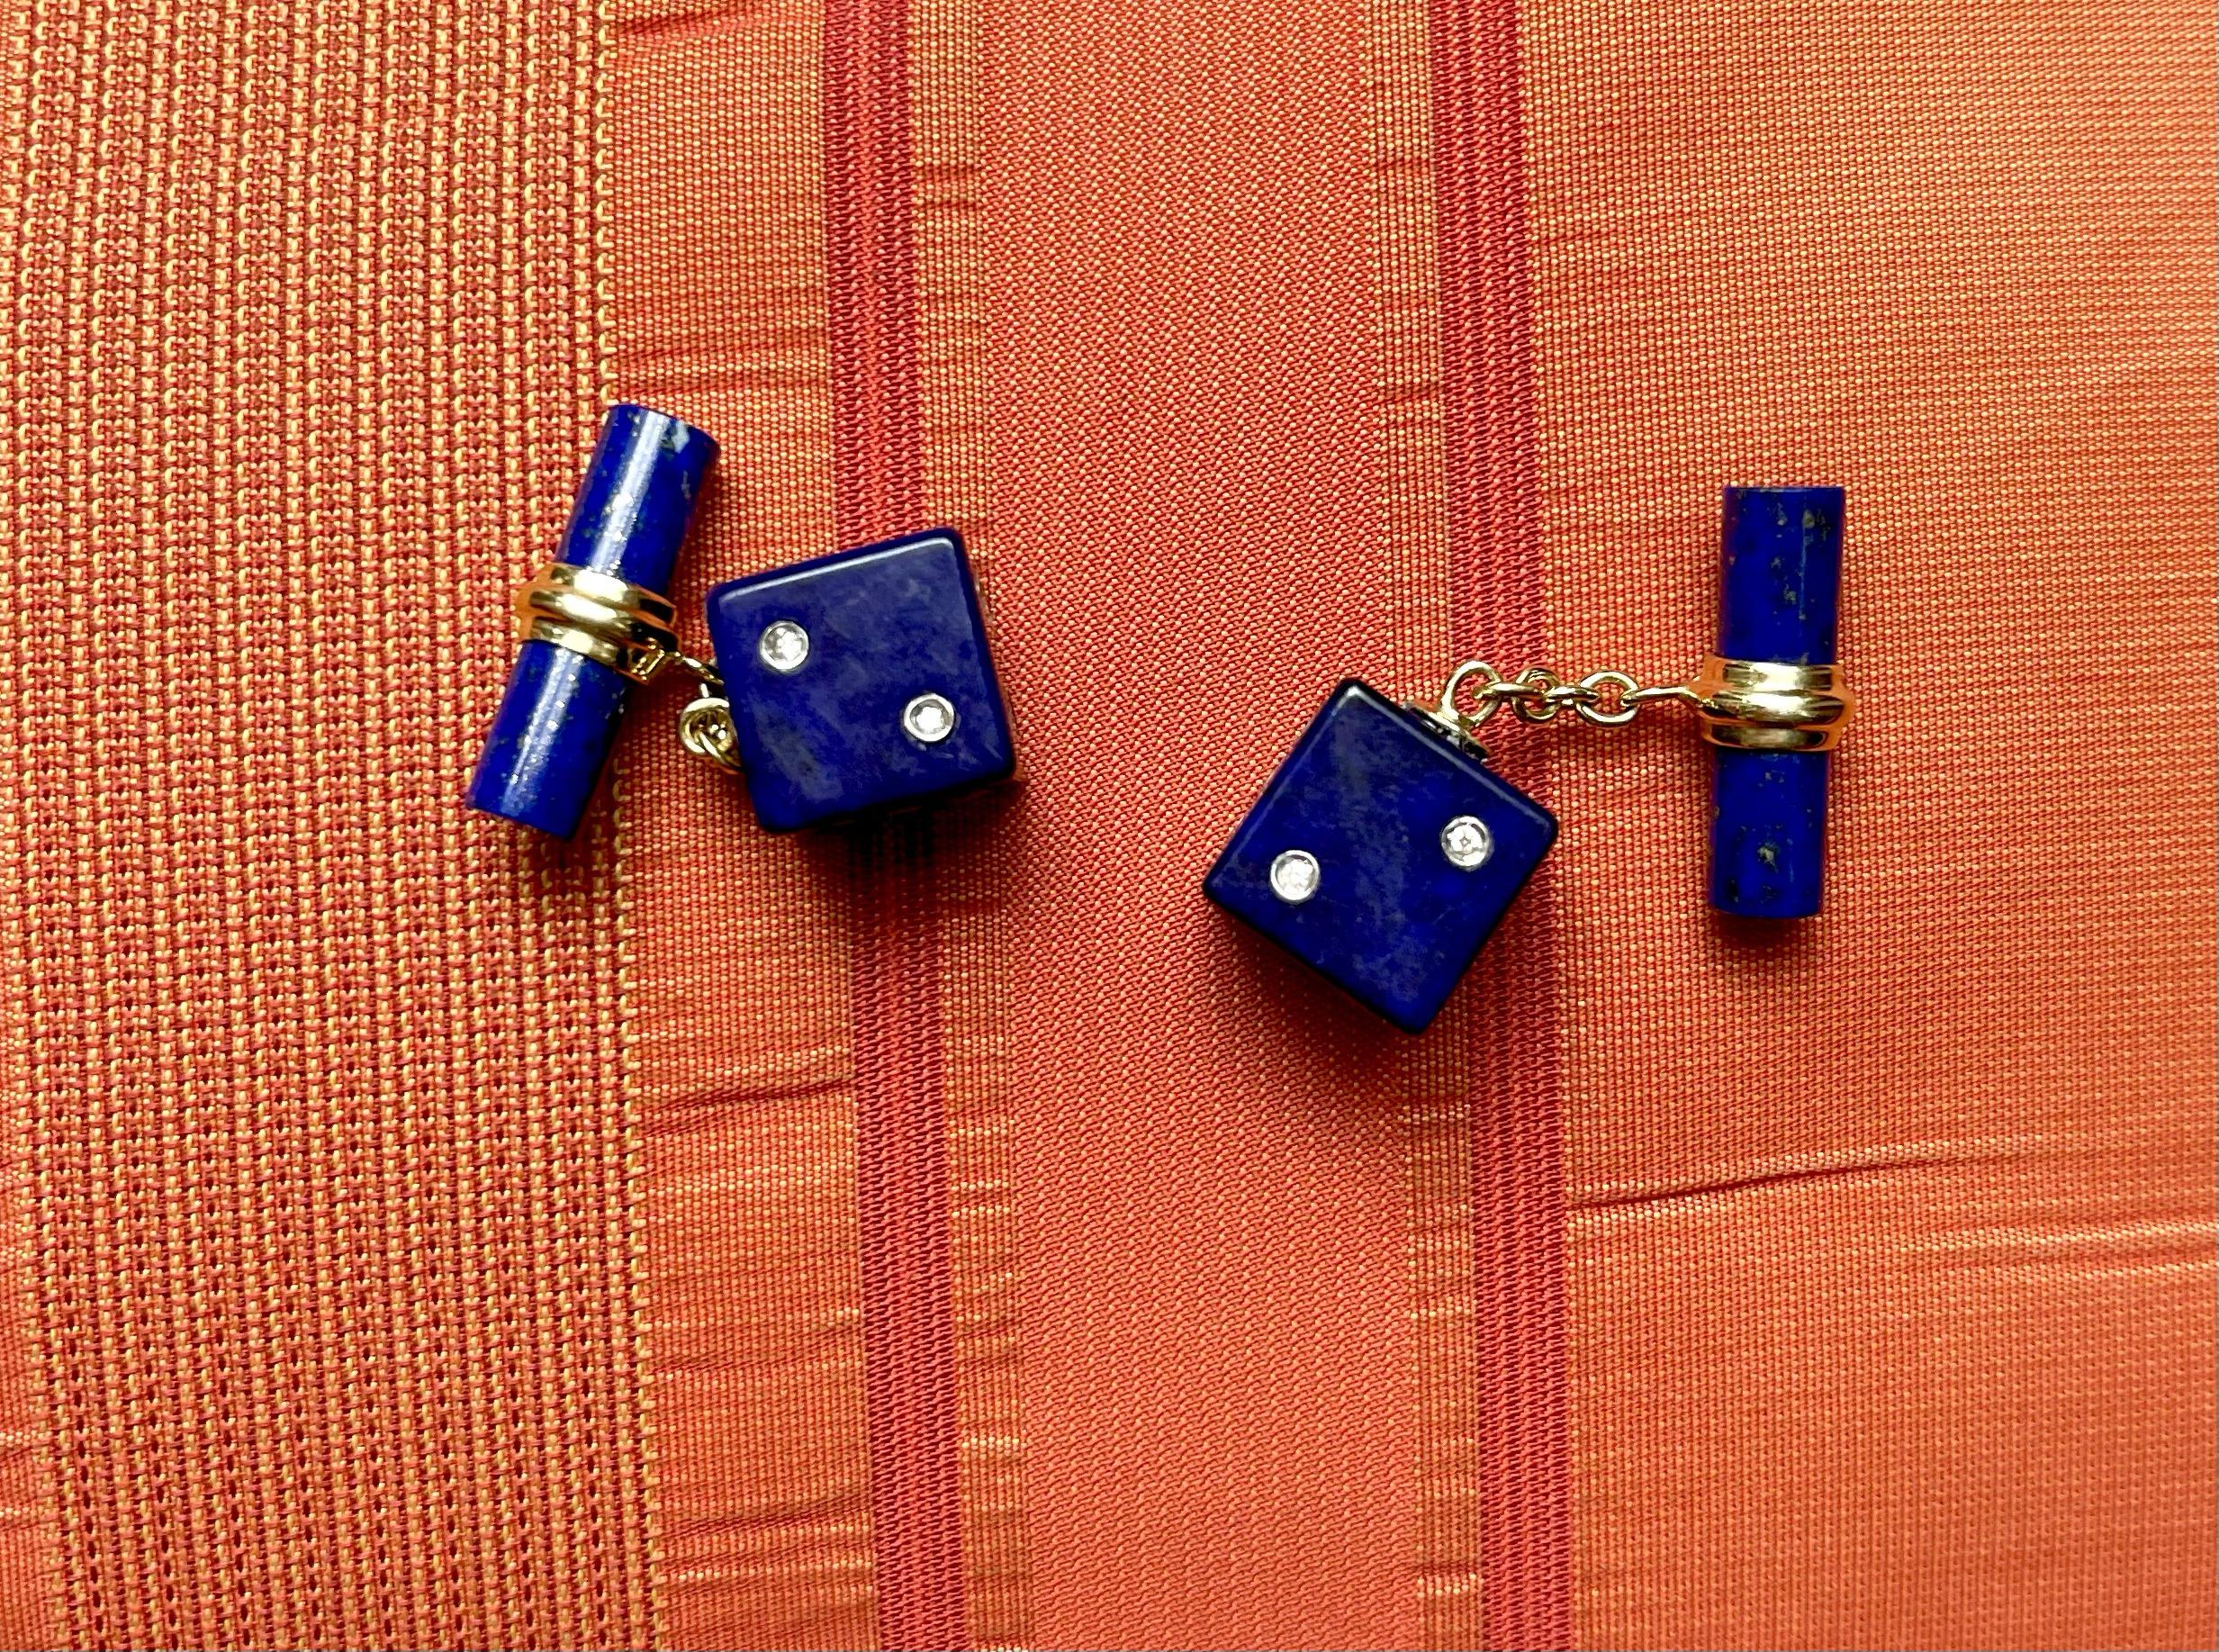 This sophisticated and particular pair of cufflinks is entirely made of lapis lazuli and it features a simple, cylindrical toggle attached to the front with an 18 karat yellow gold post. 
The front face is shaped as a cube with its striking deep